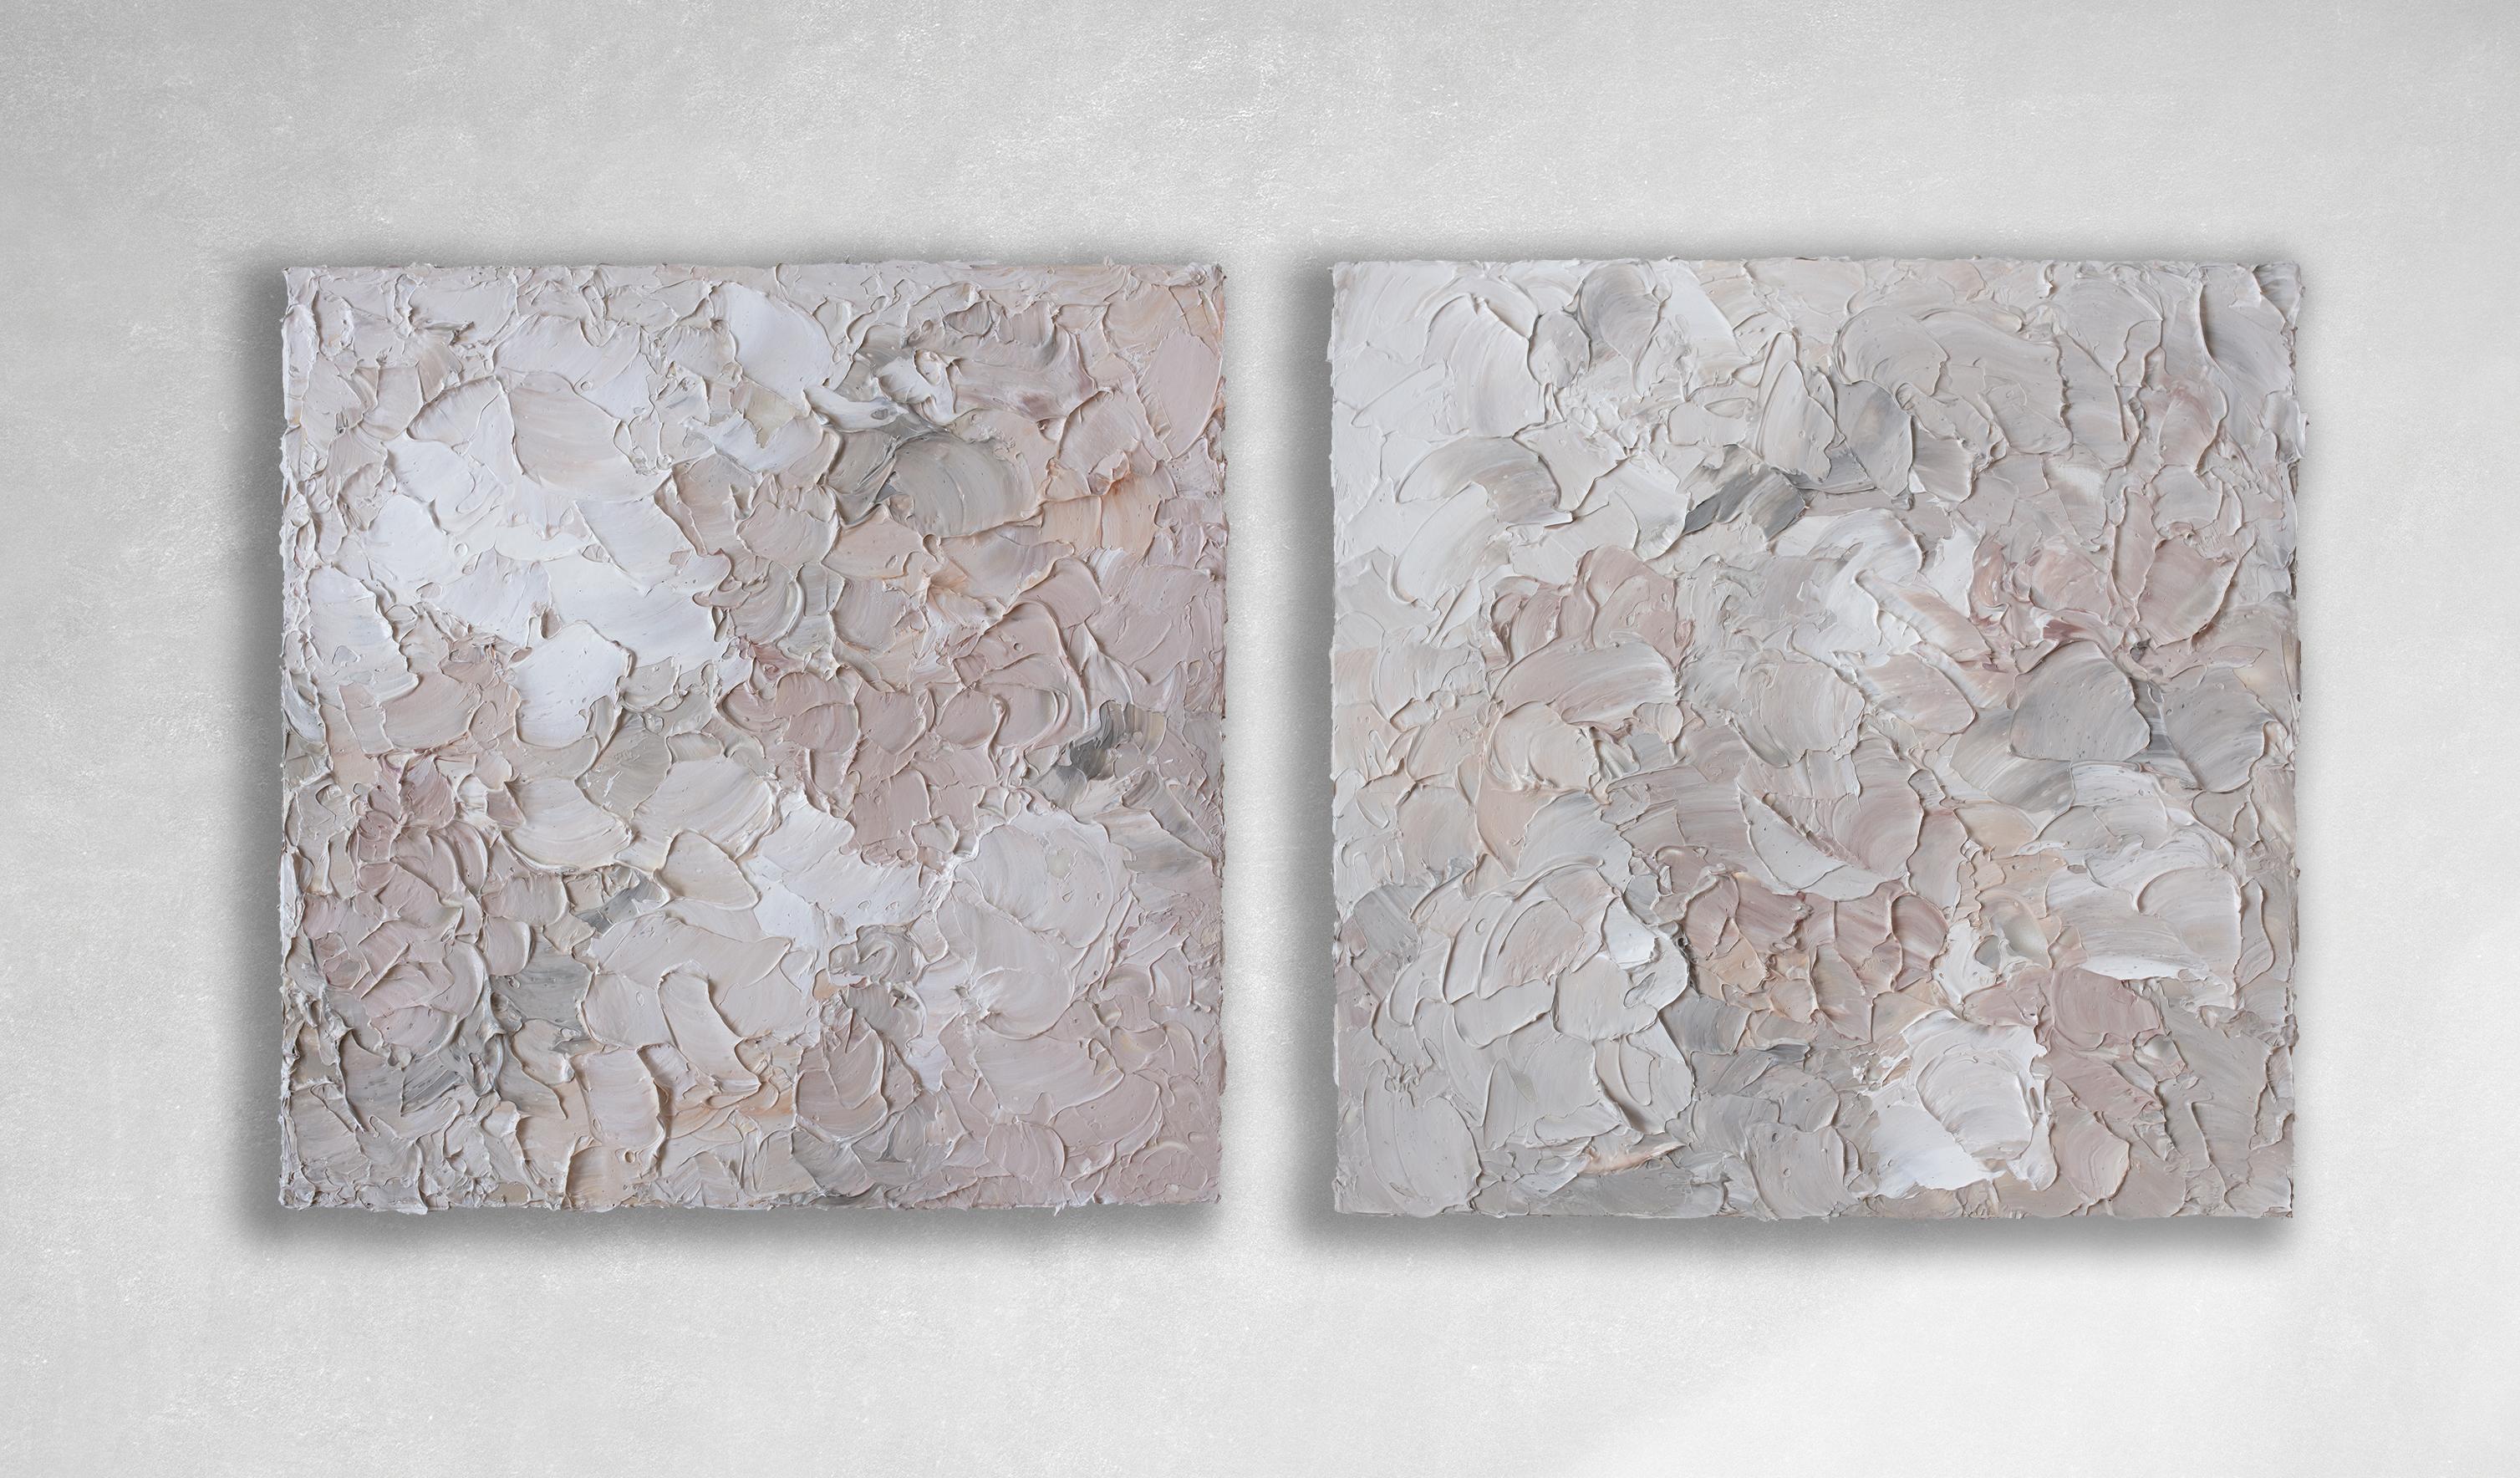 This pair of textured abstract paintings by Teodora Guererra features a warm neutral palette with varying tones of muted blush and coral with white and warm grey. The artist uses a palette knife to layer thick applications of paint on the panels, a